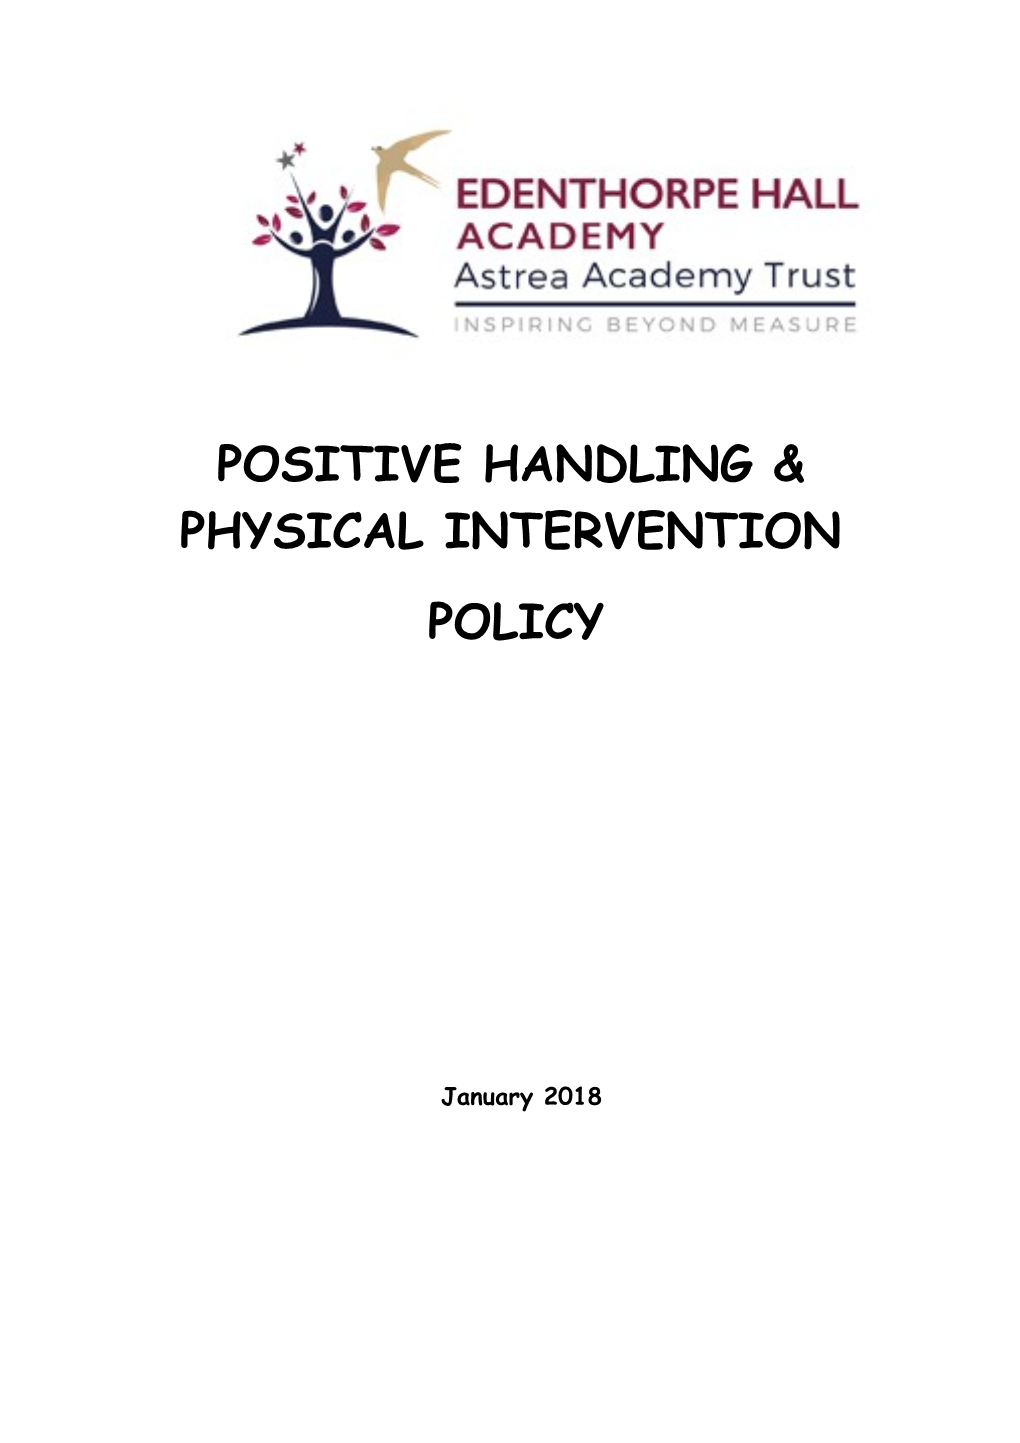 Positive Handling & Physical Intervention